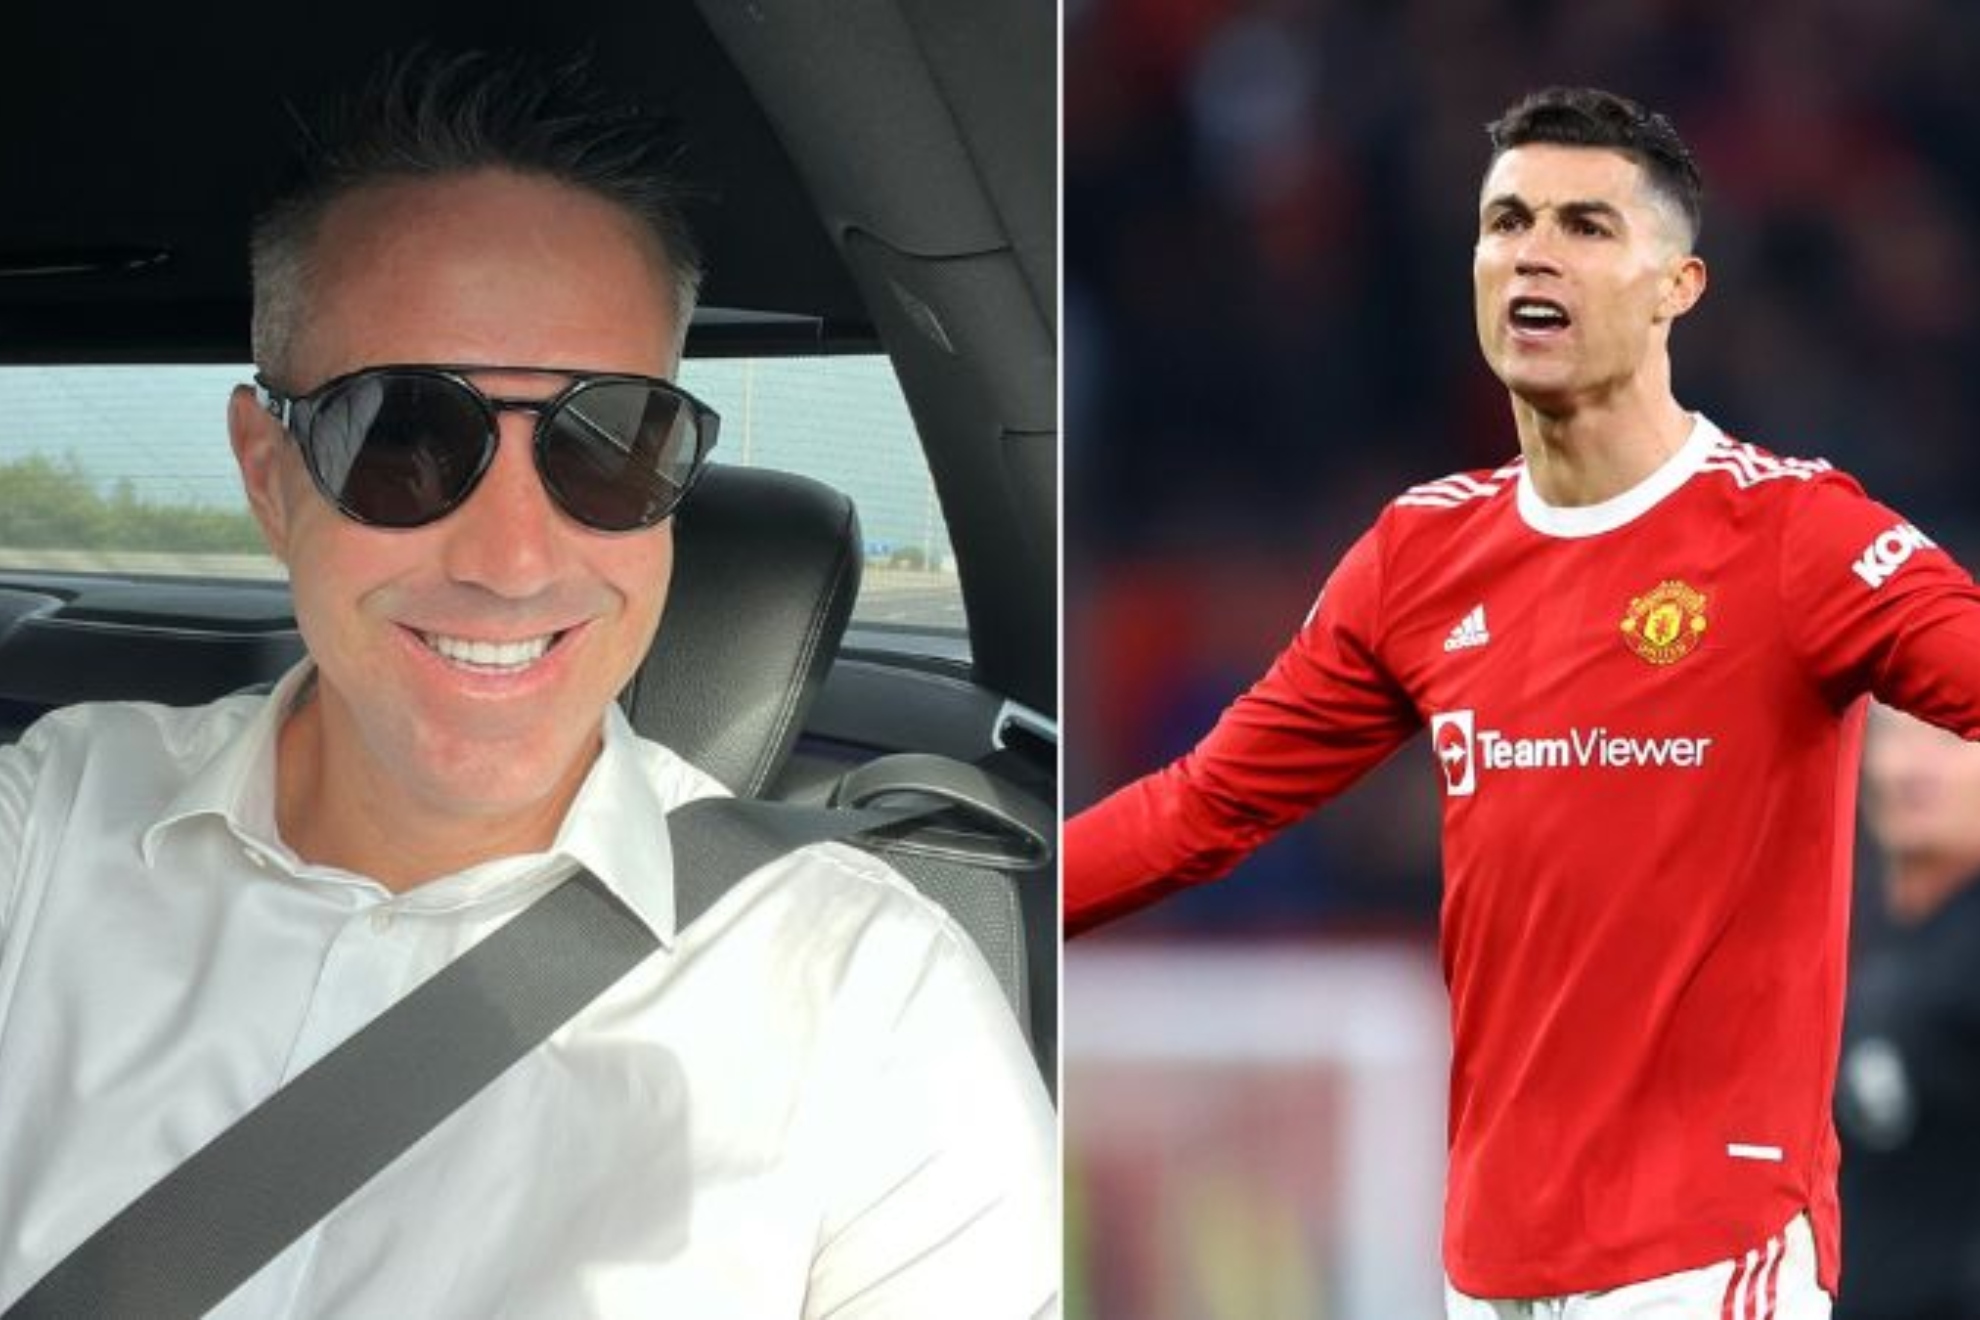 Kevin Pietersen weighs in on Cristiano Ronaldo drama: The club is run by a clown